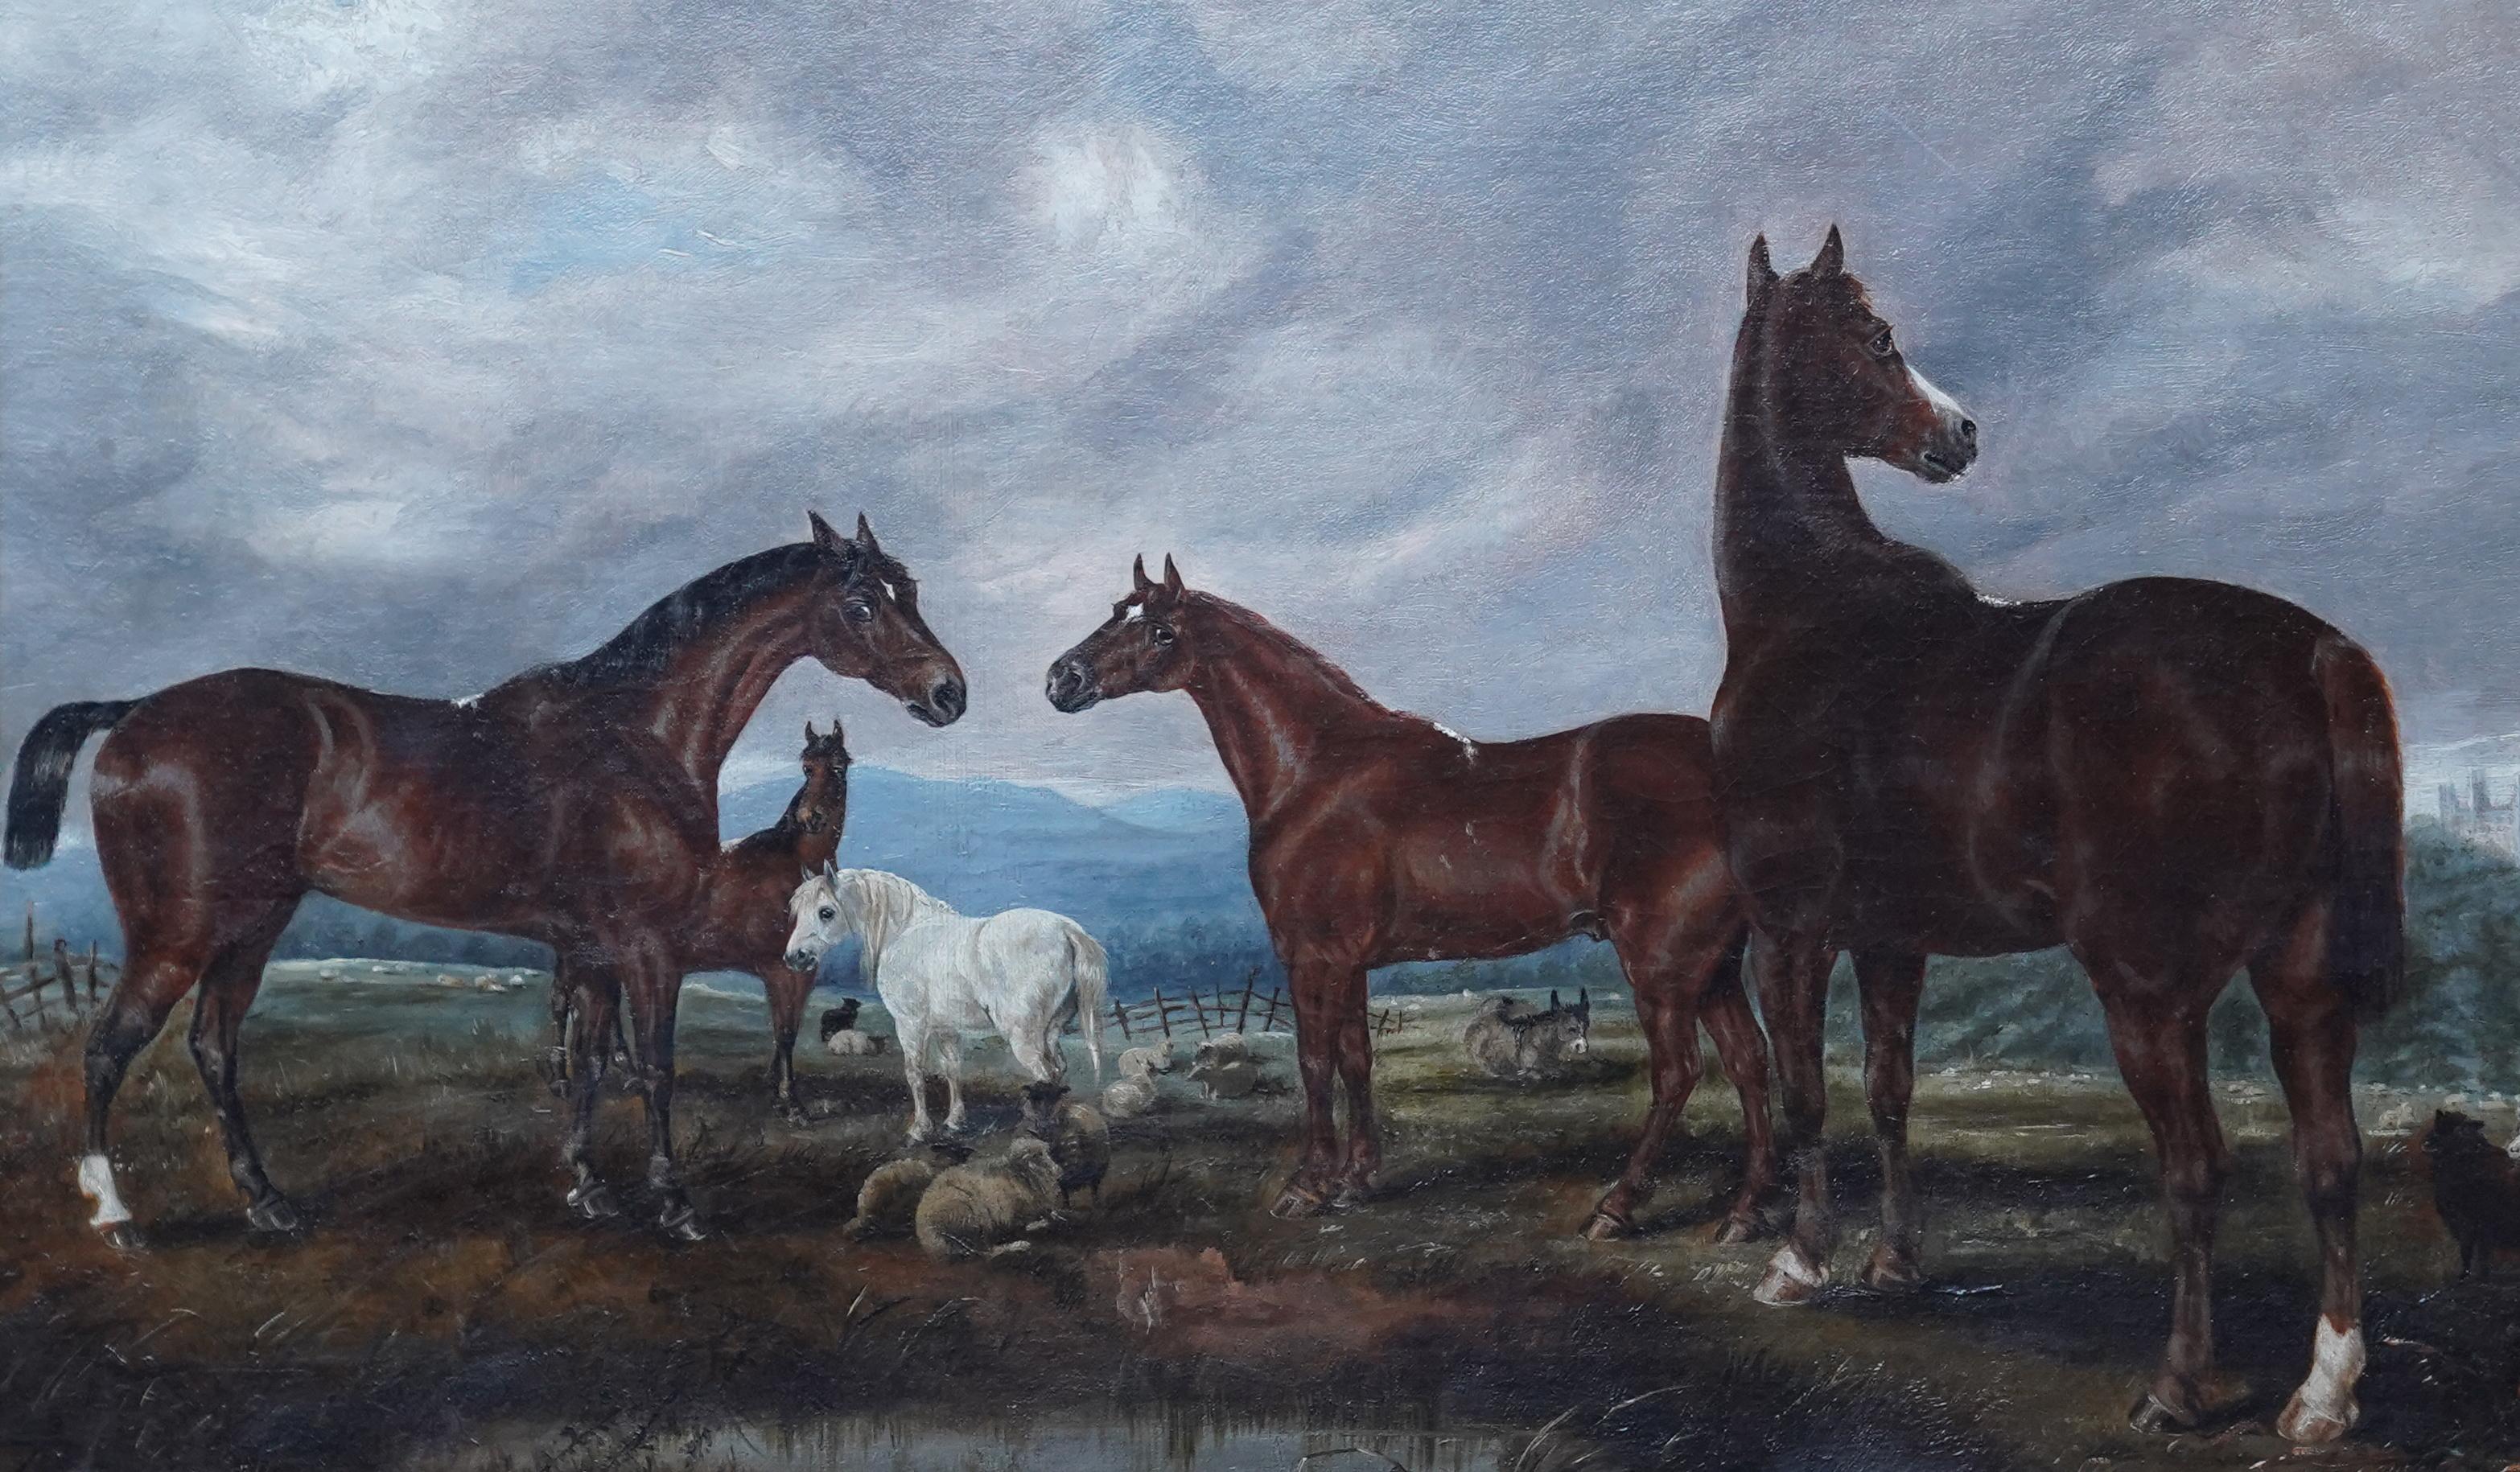 Horses in Landscape - British Victorian art equine animal portrait oil painting - Realist Painting by Edwin Brown